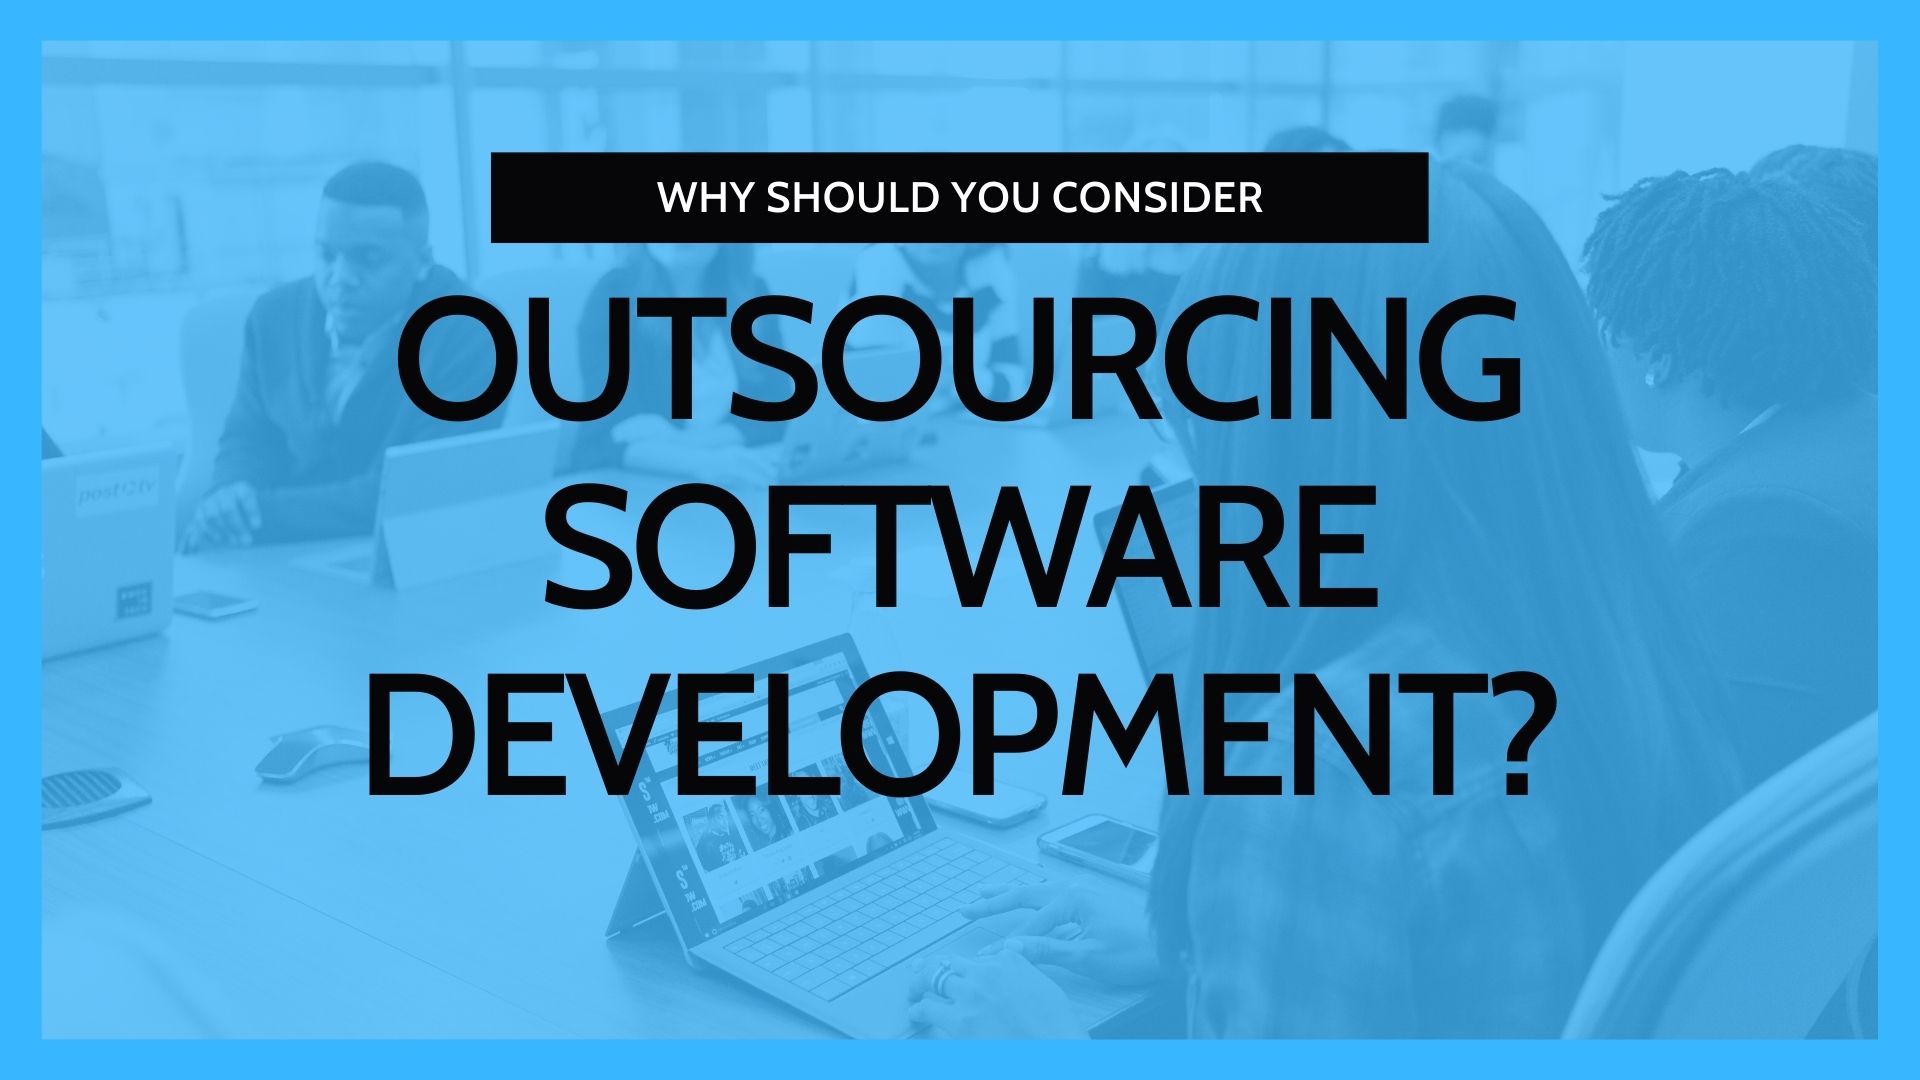 Why should you consider outsourcing your software development?